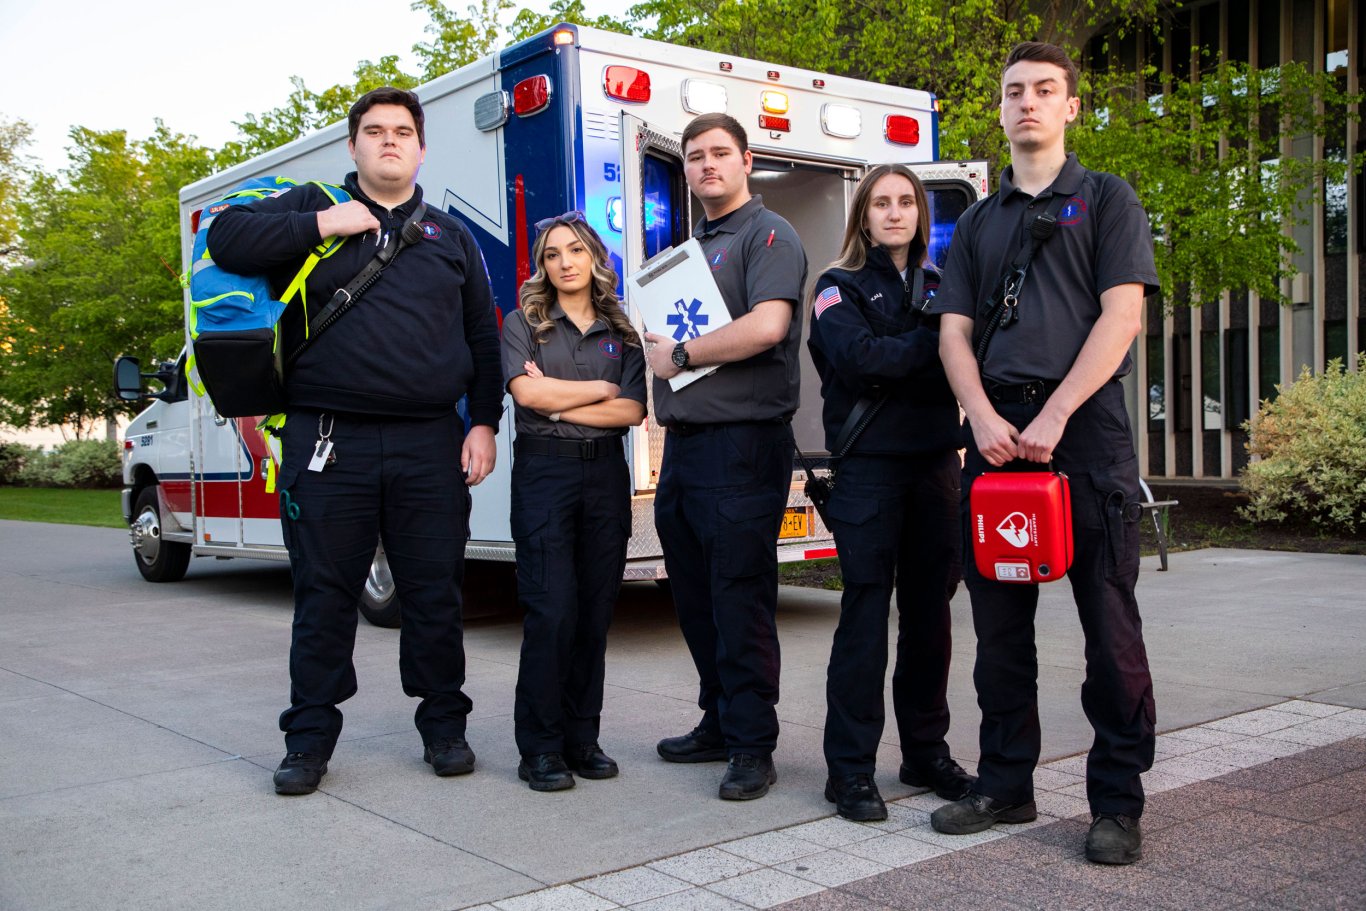 Five ambulance crew members in Five Quad uniforms and holding gear pose for a photo in front of an ambulance. 